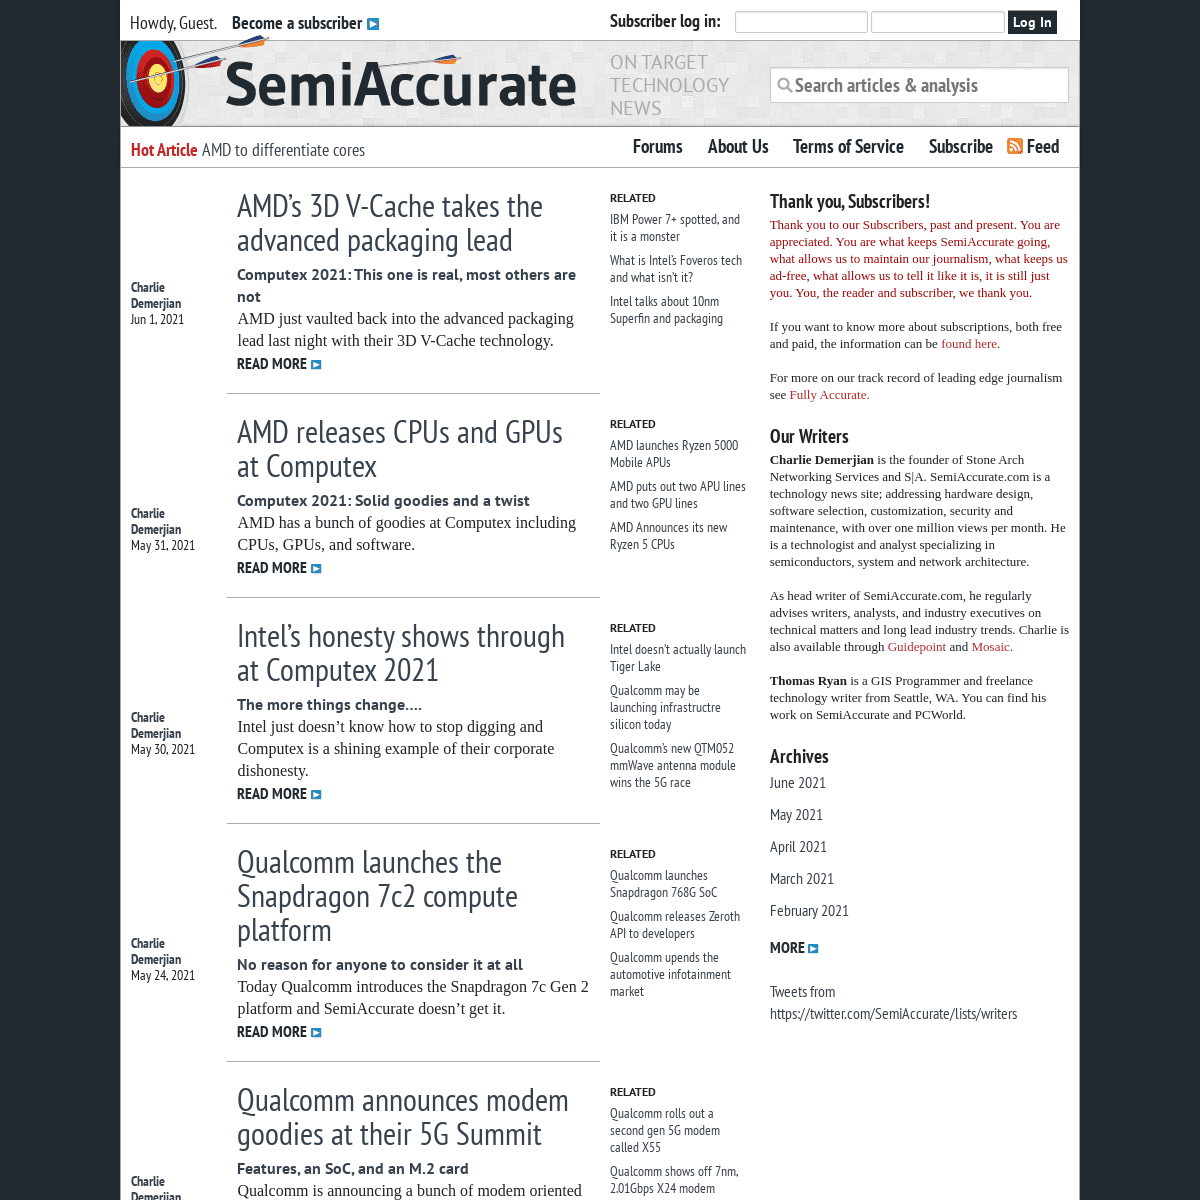 A complete backup of https://semiaccurate.com